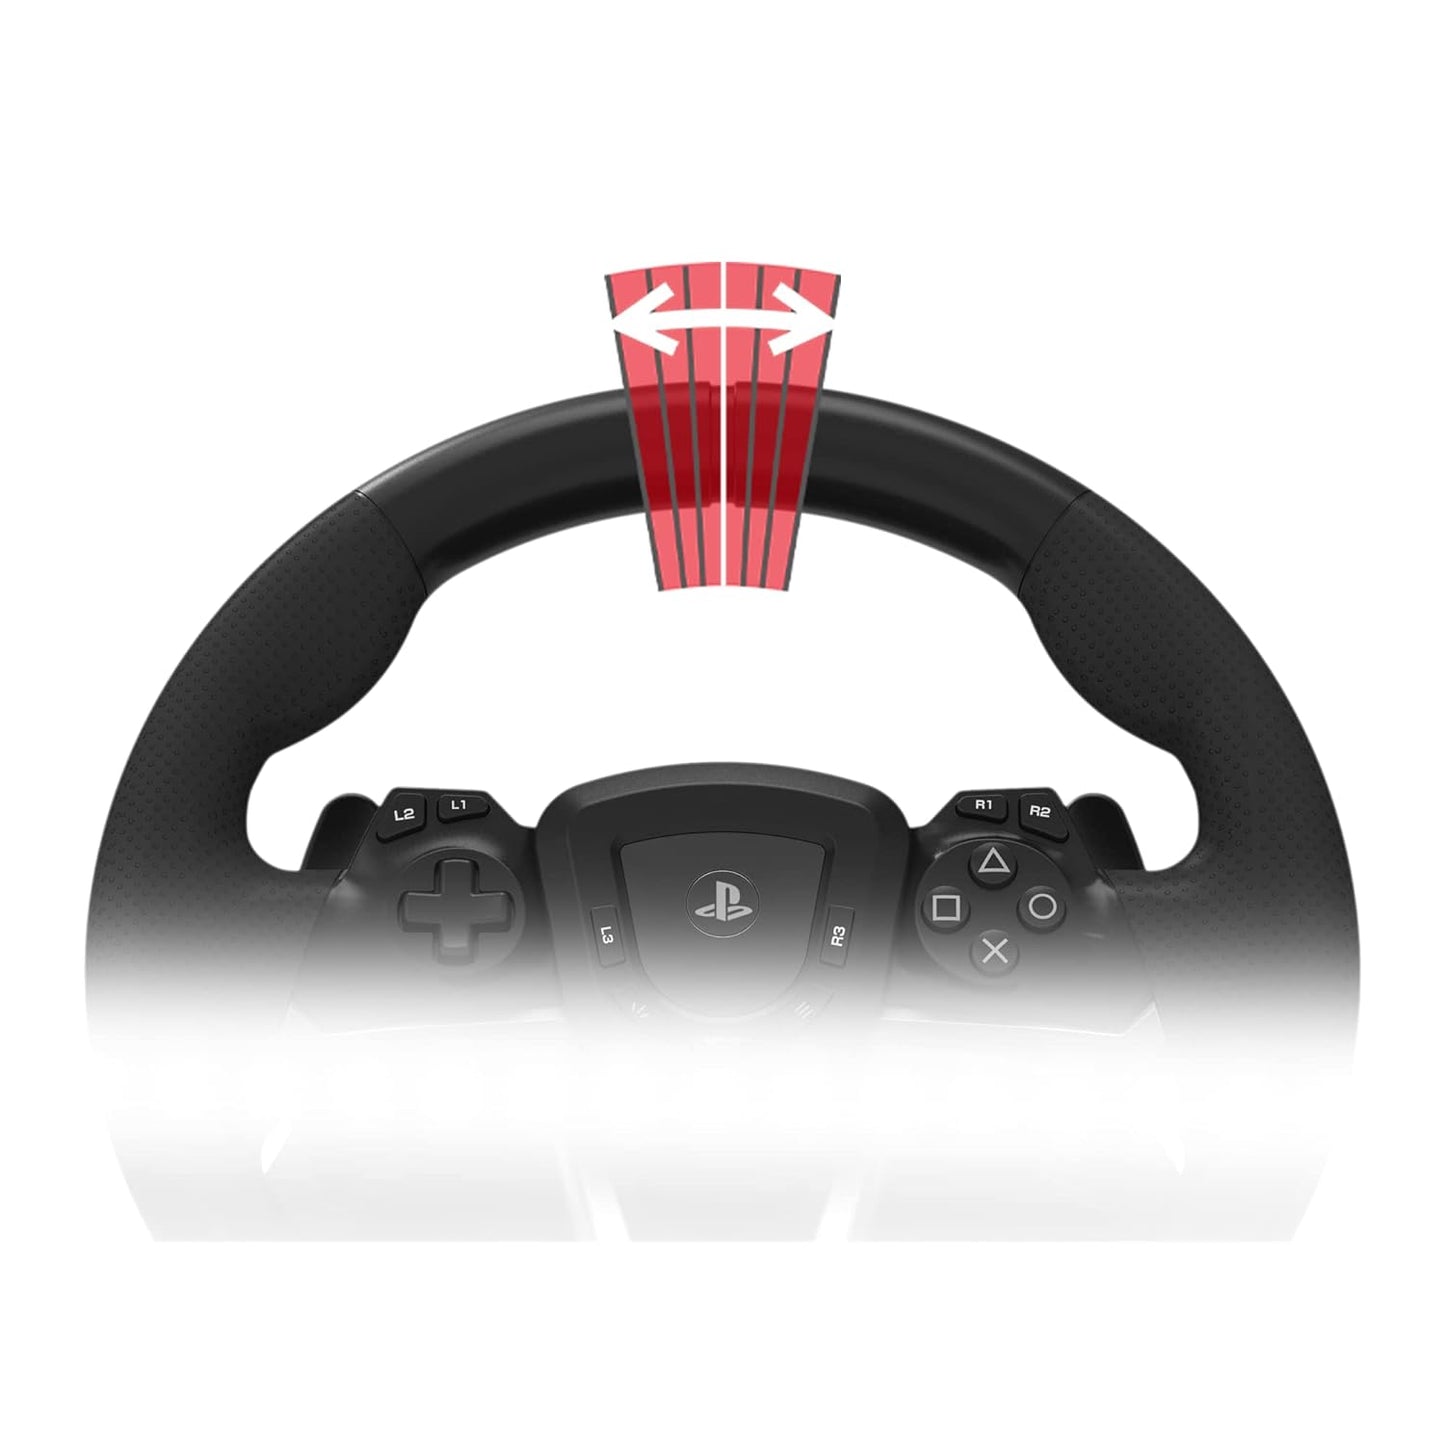 HORI Racing Wheel Apex for PlayStation 5 – 4 / PC | (Officially Licensed by Sony)